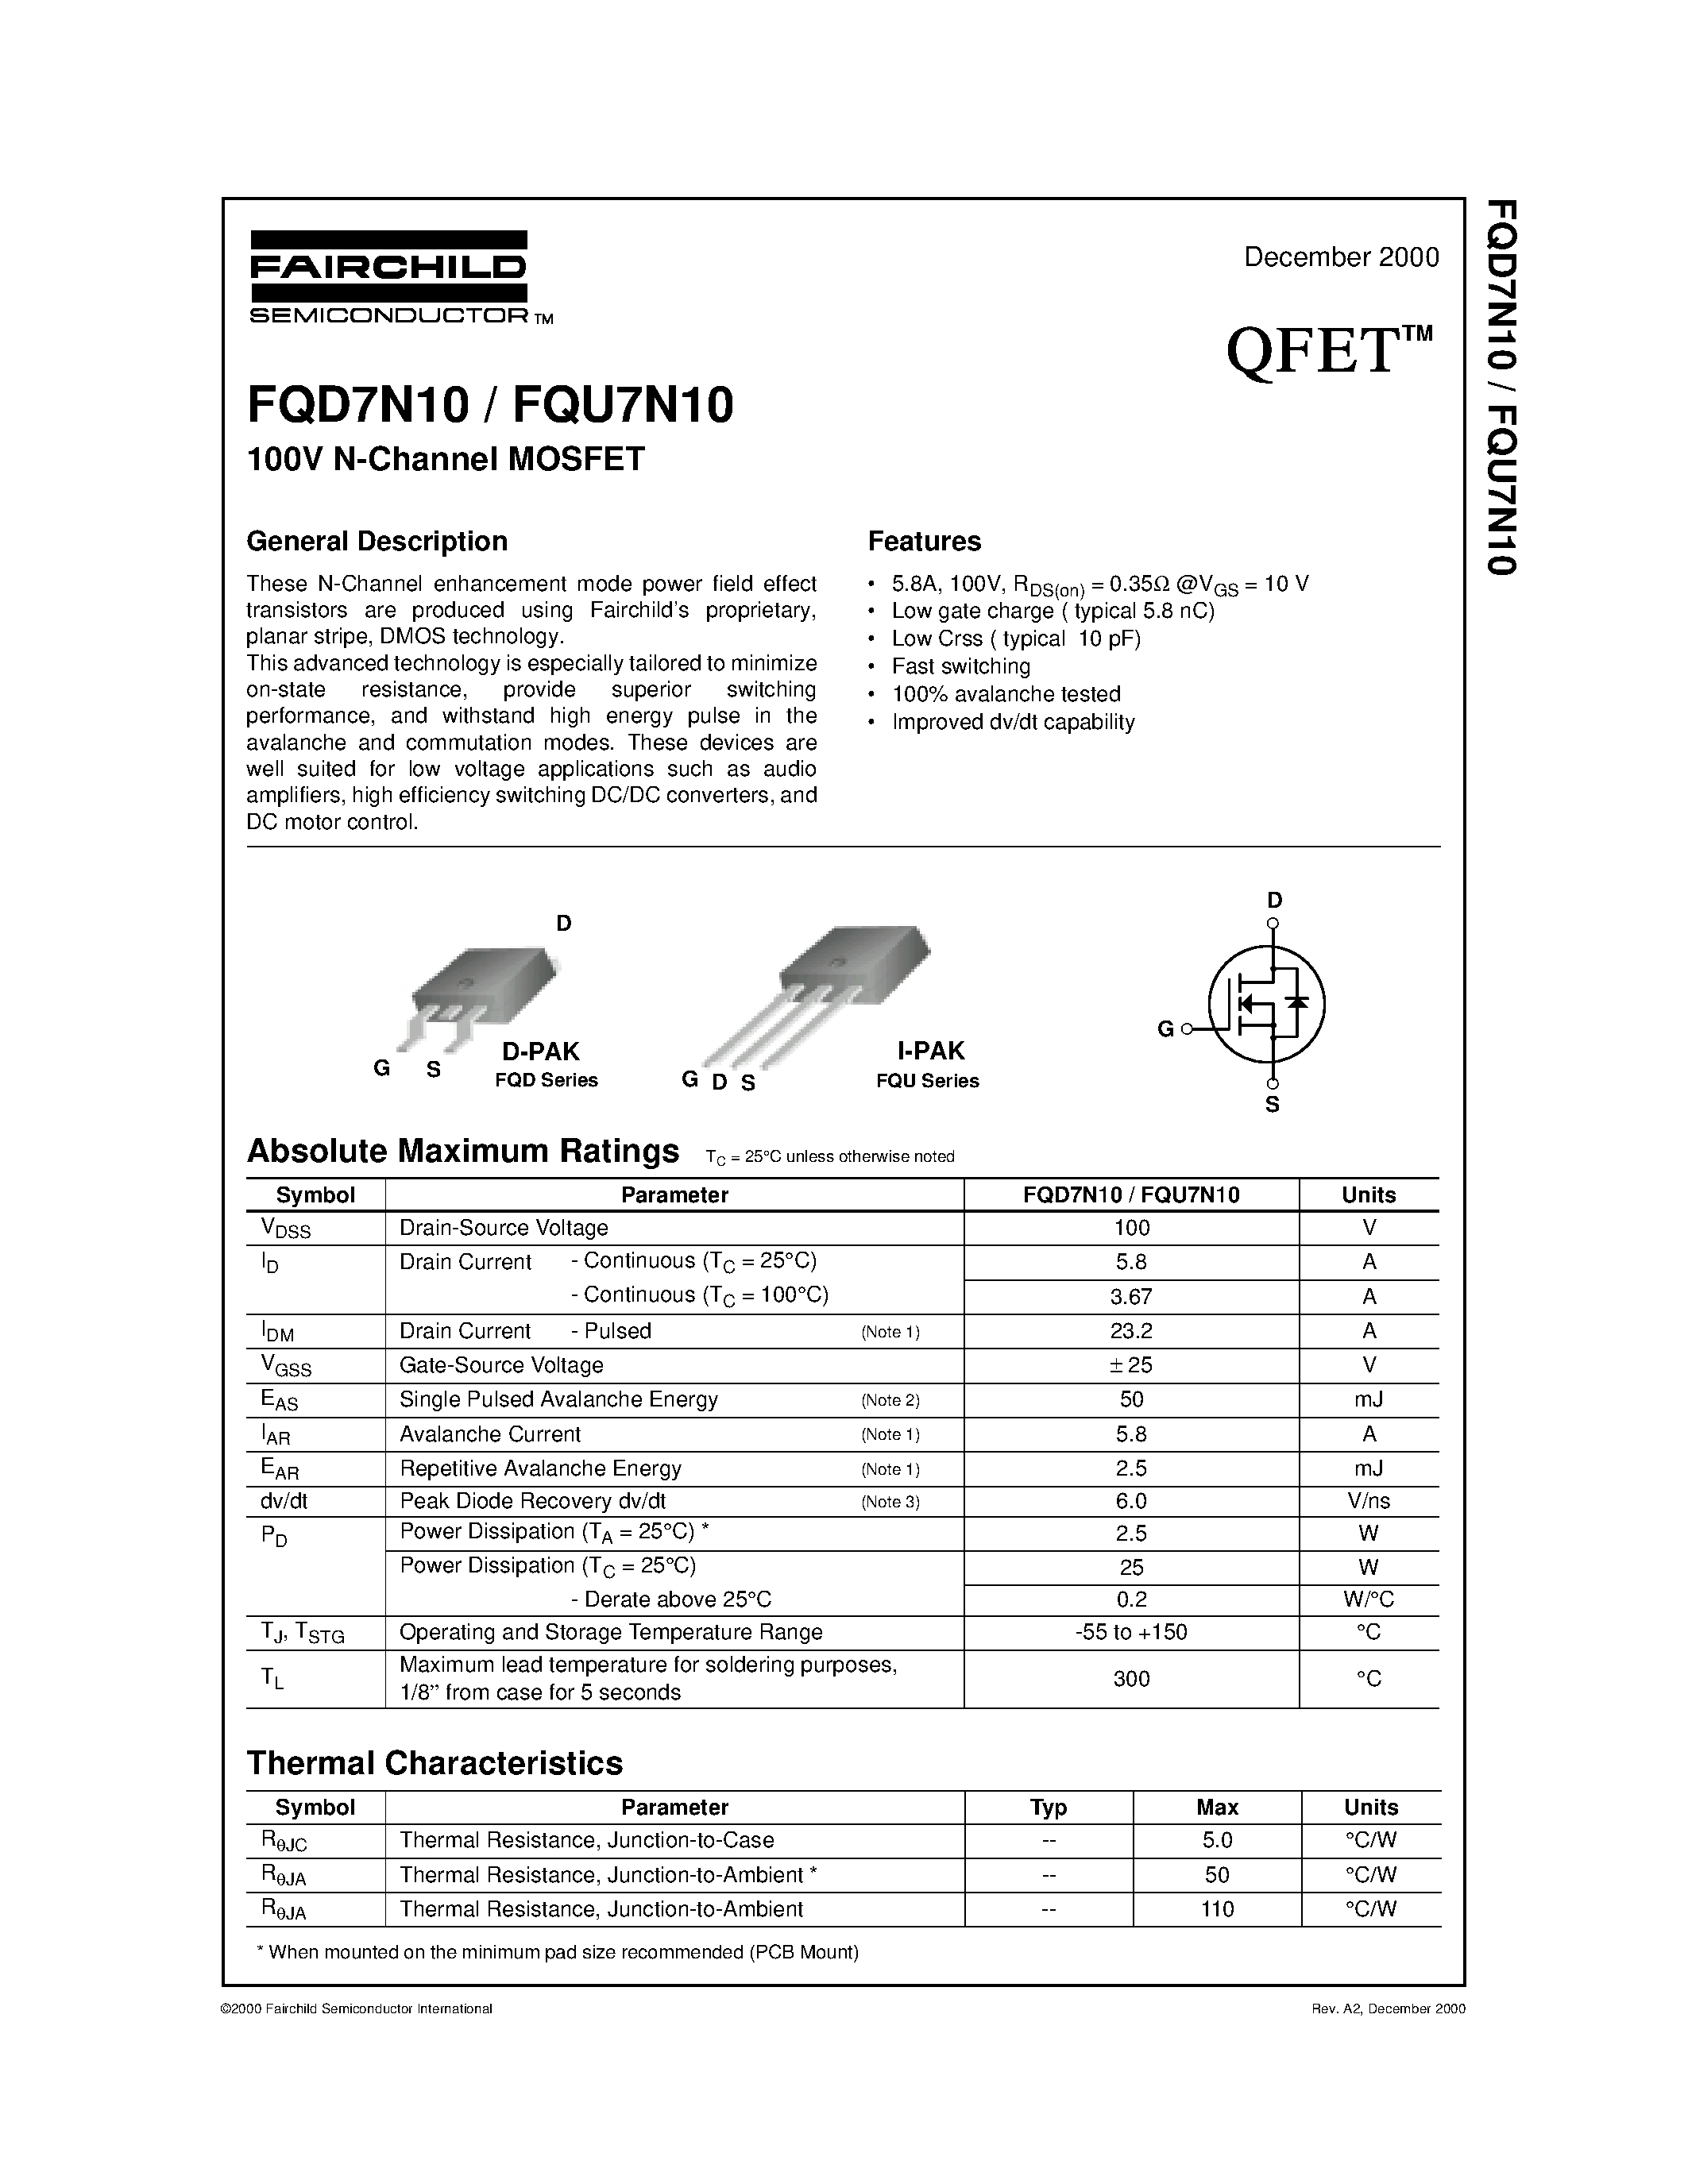 Datasheet FQD7N10 - 100V N-Channel MOSFET page 1